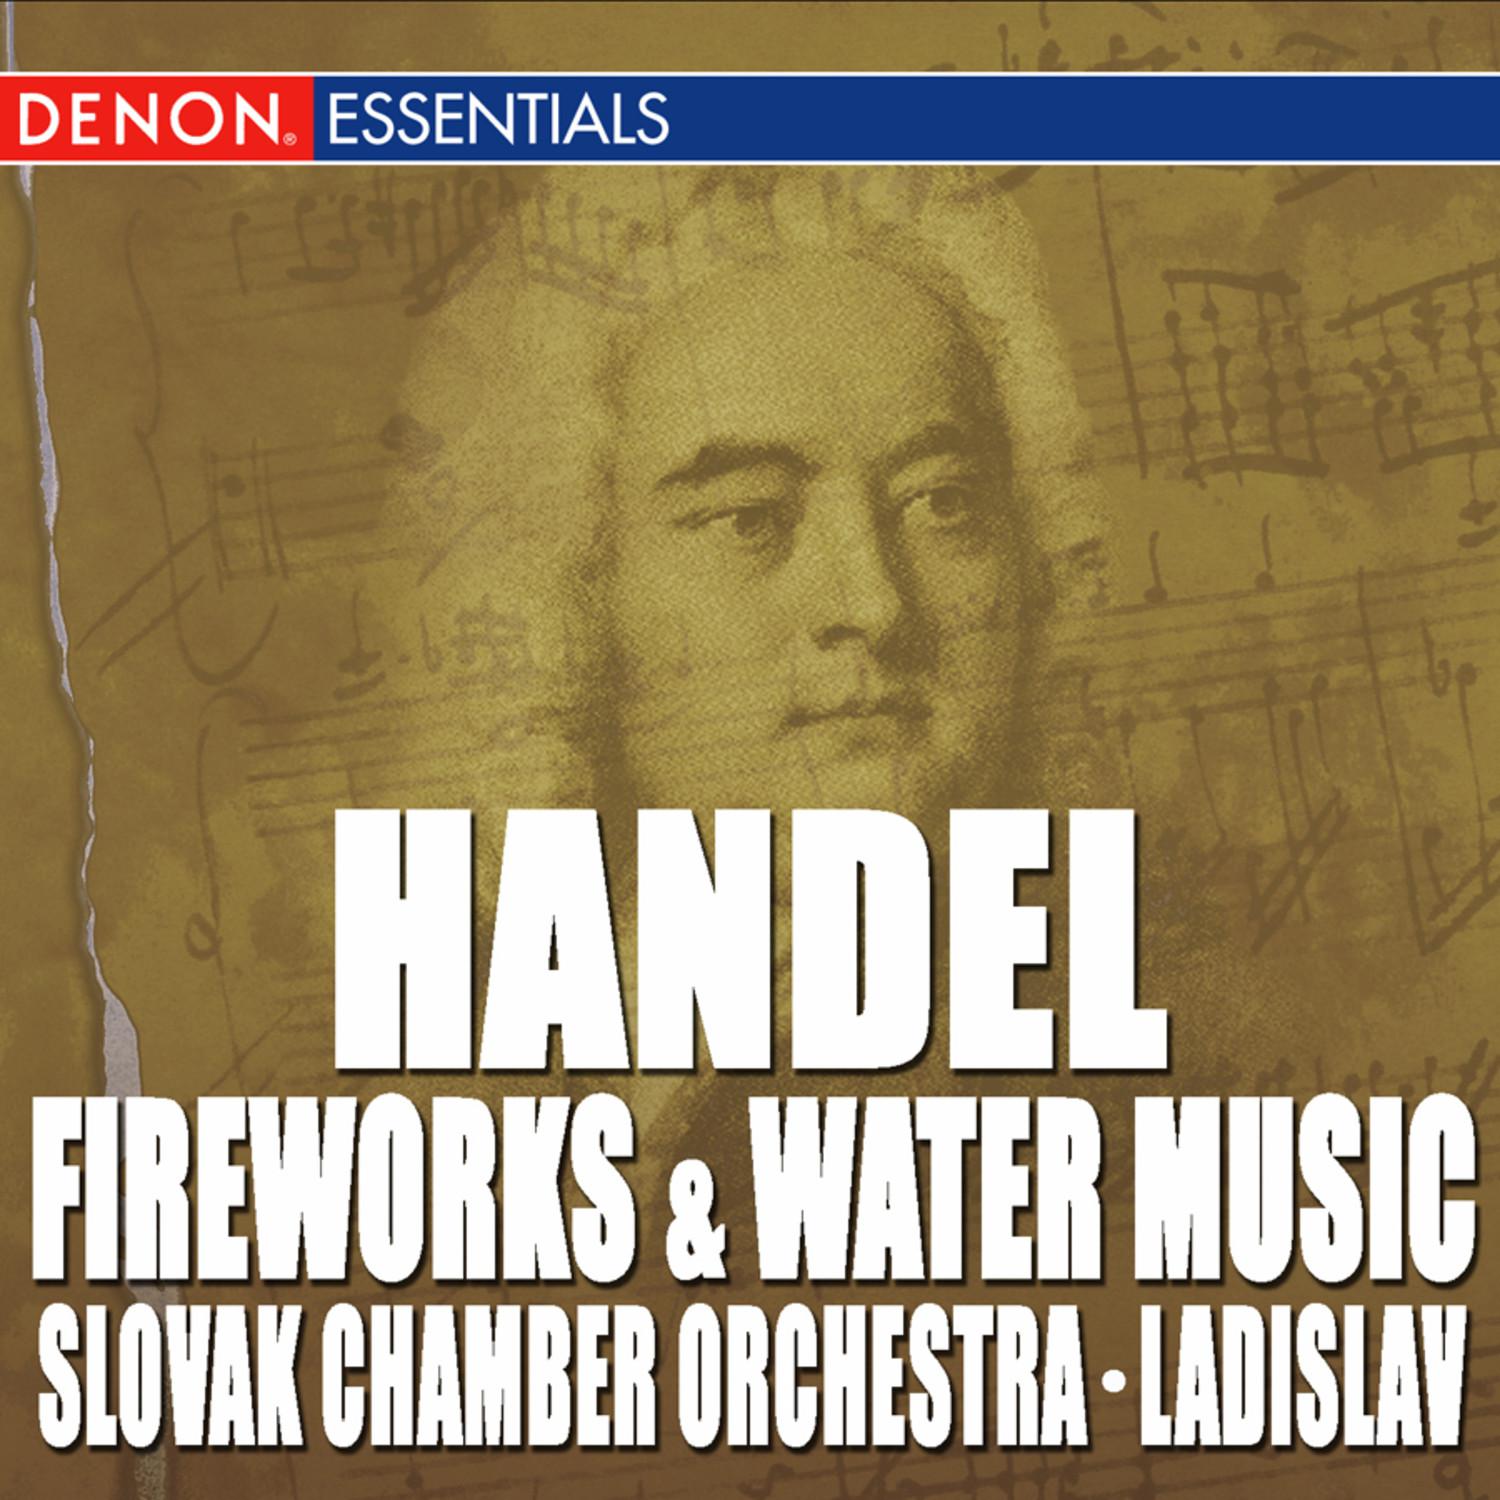 Water Music Suite No. 1 in F, HWV 348: I. Prelude